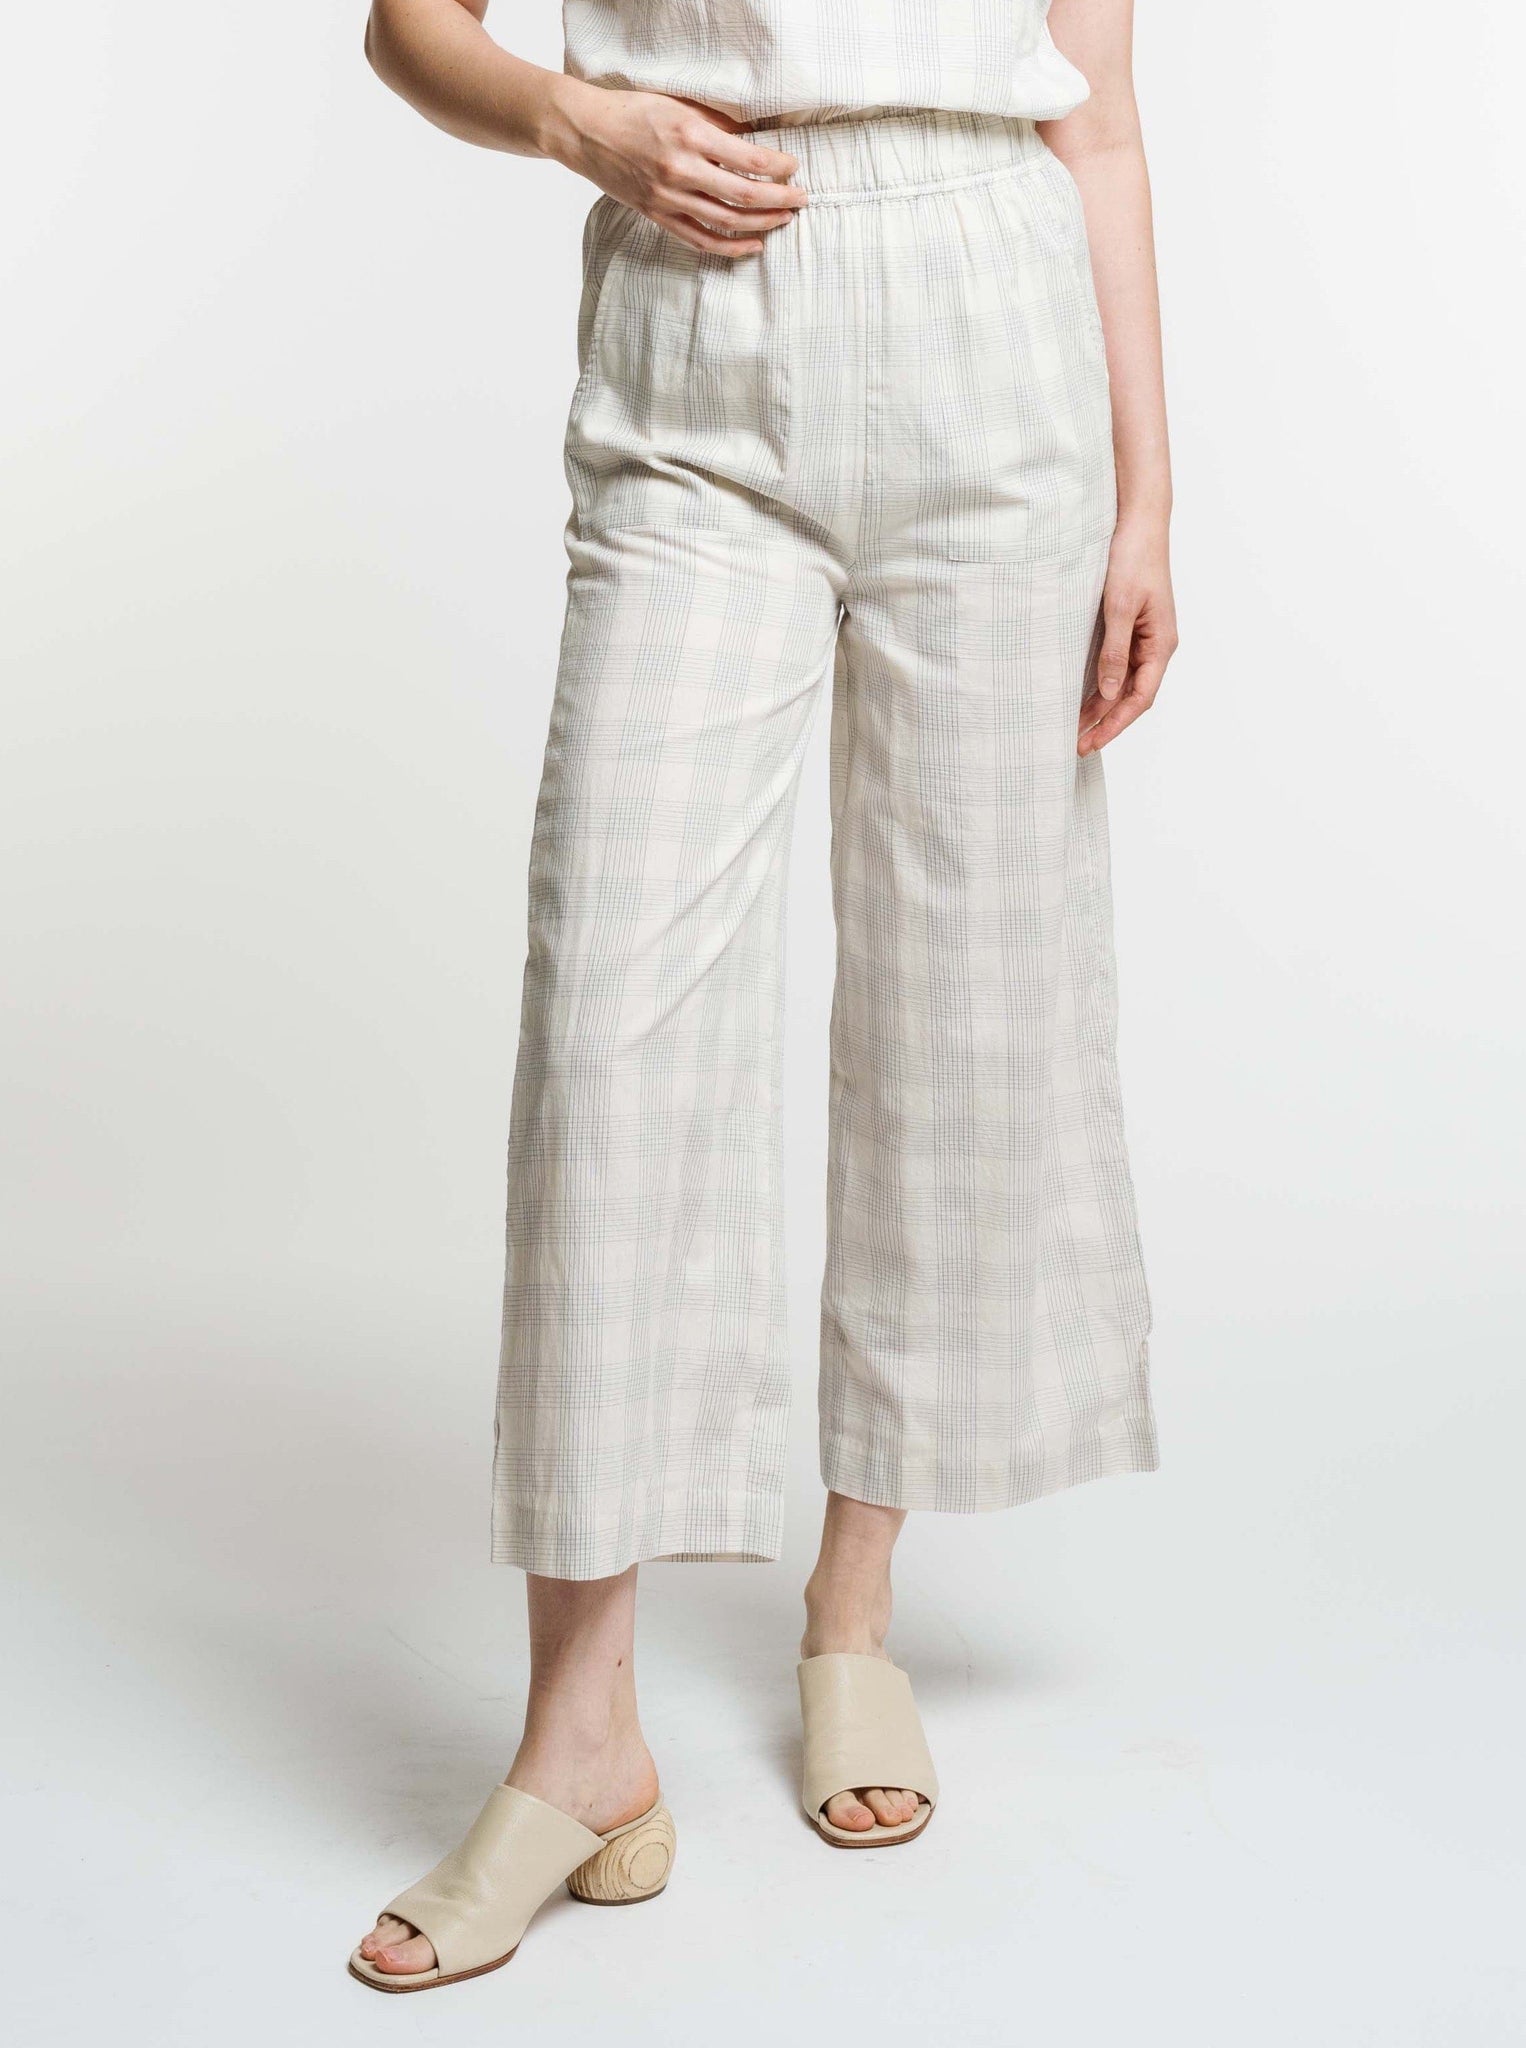 A woman wearing the Everyday Crop Pant - Rivera Plaid.